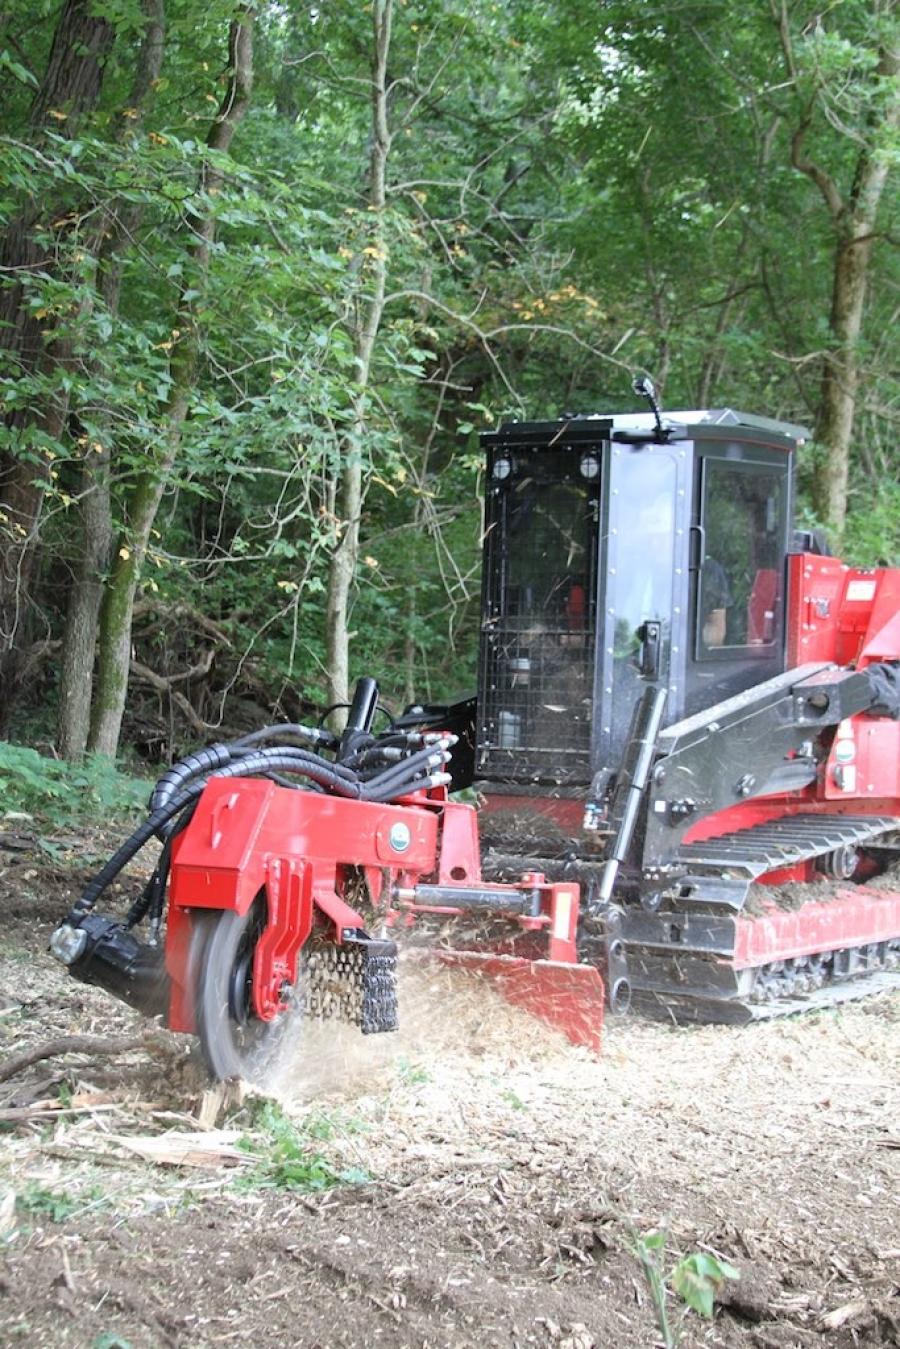 Fecon Inc.’s SH280 Stump Hog stump grinder delivers impressive torque and wheel speed of 1,000 rpm through a large displacement direct drive 227cc hydraulic motor and the large 28.75 in. (73 cm) diameter wheel is swept from side to side with the ergonomic control of the FTX128 joystick.